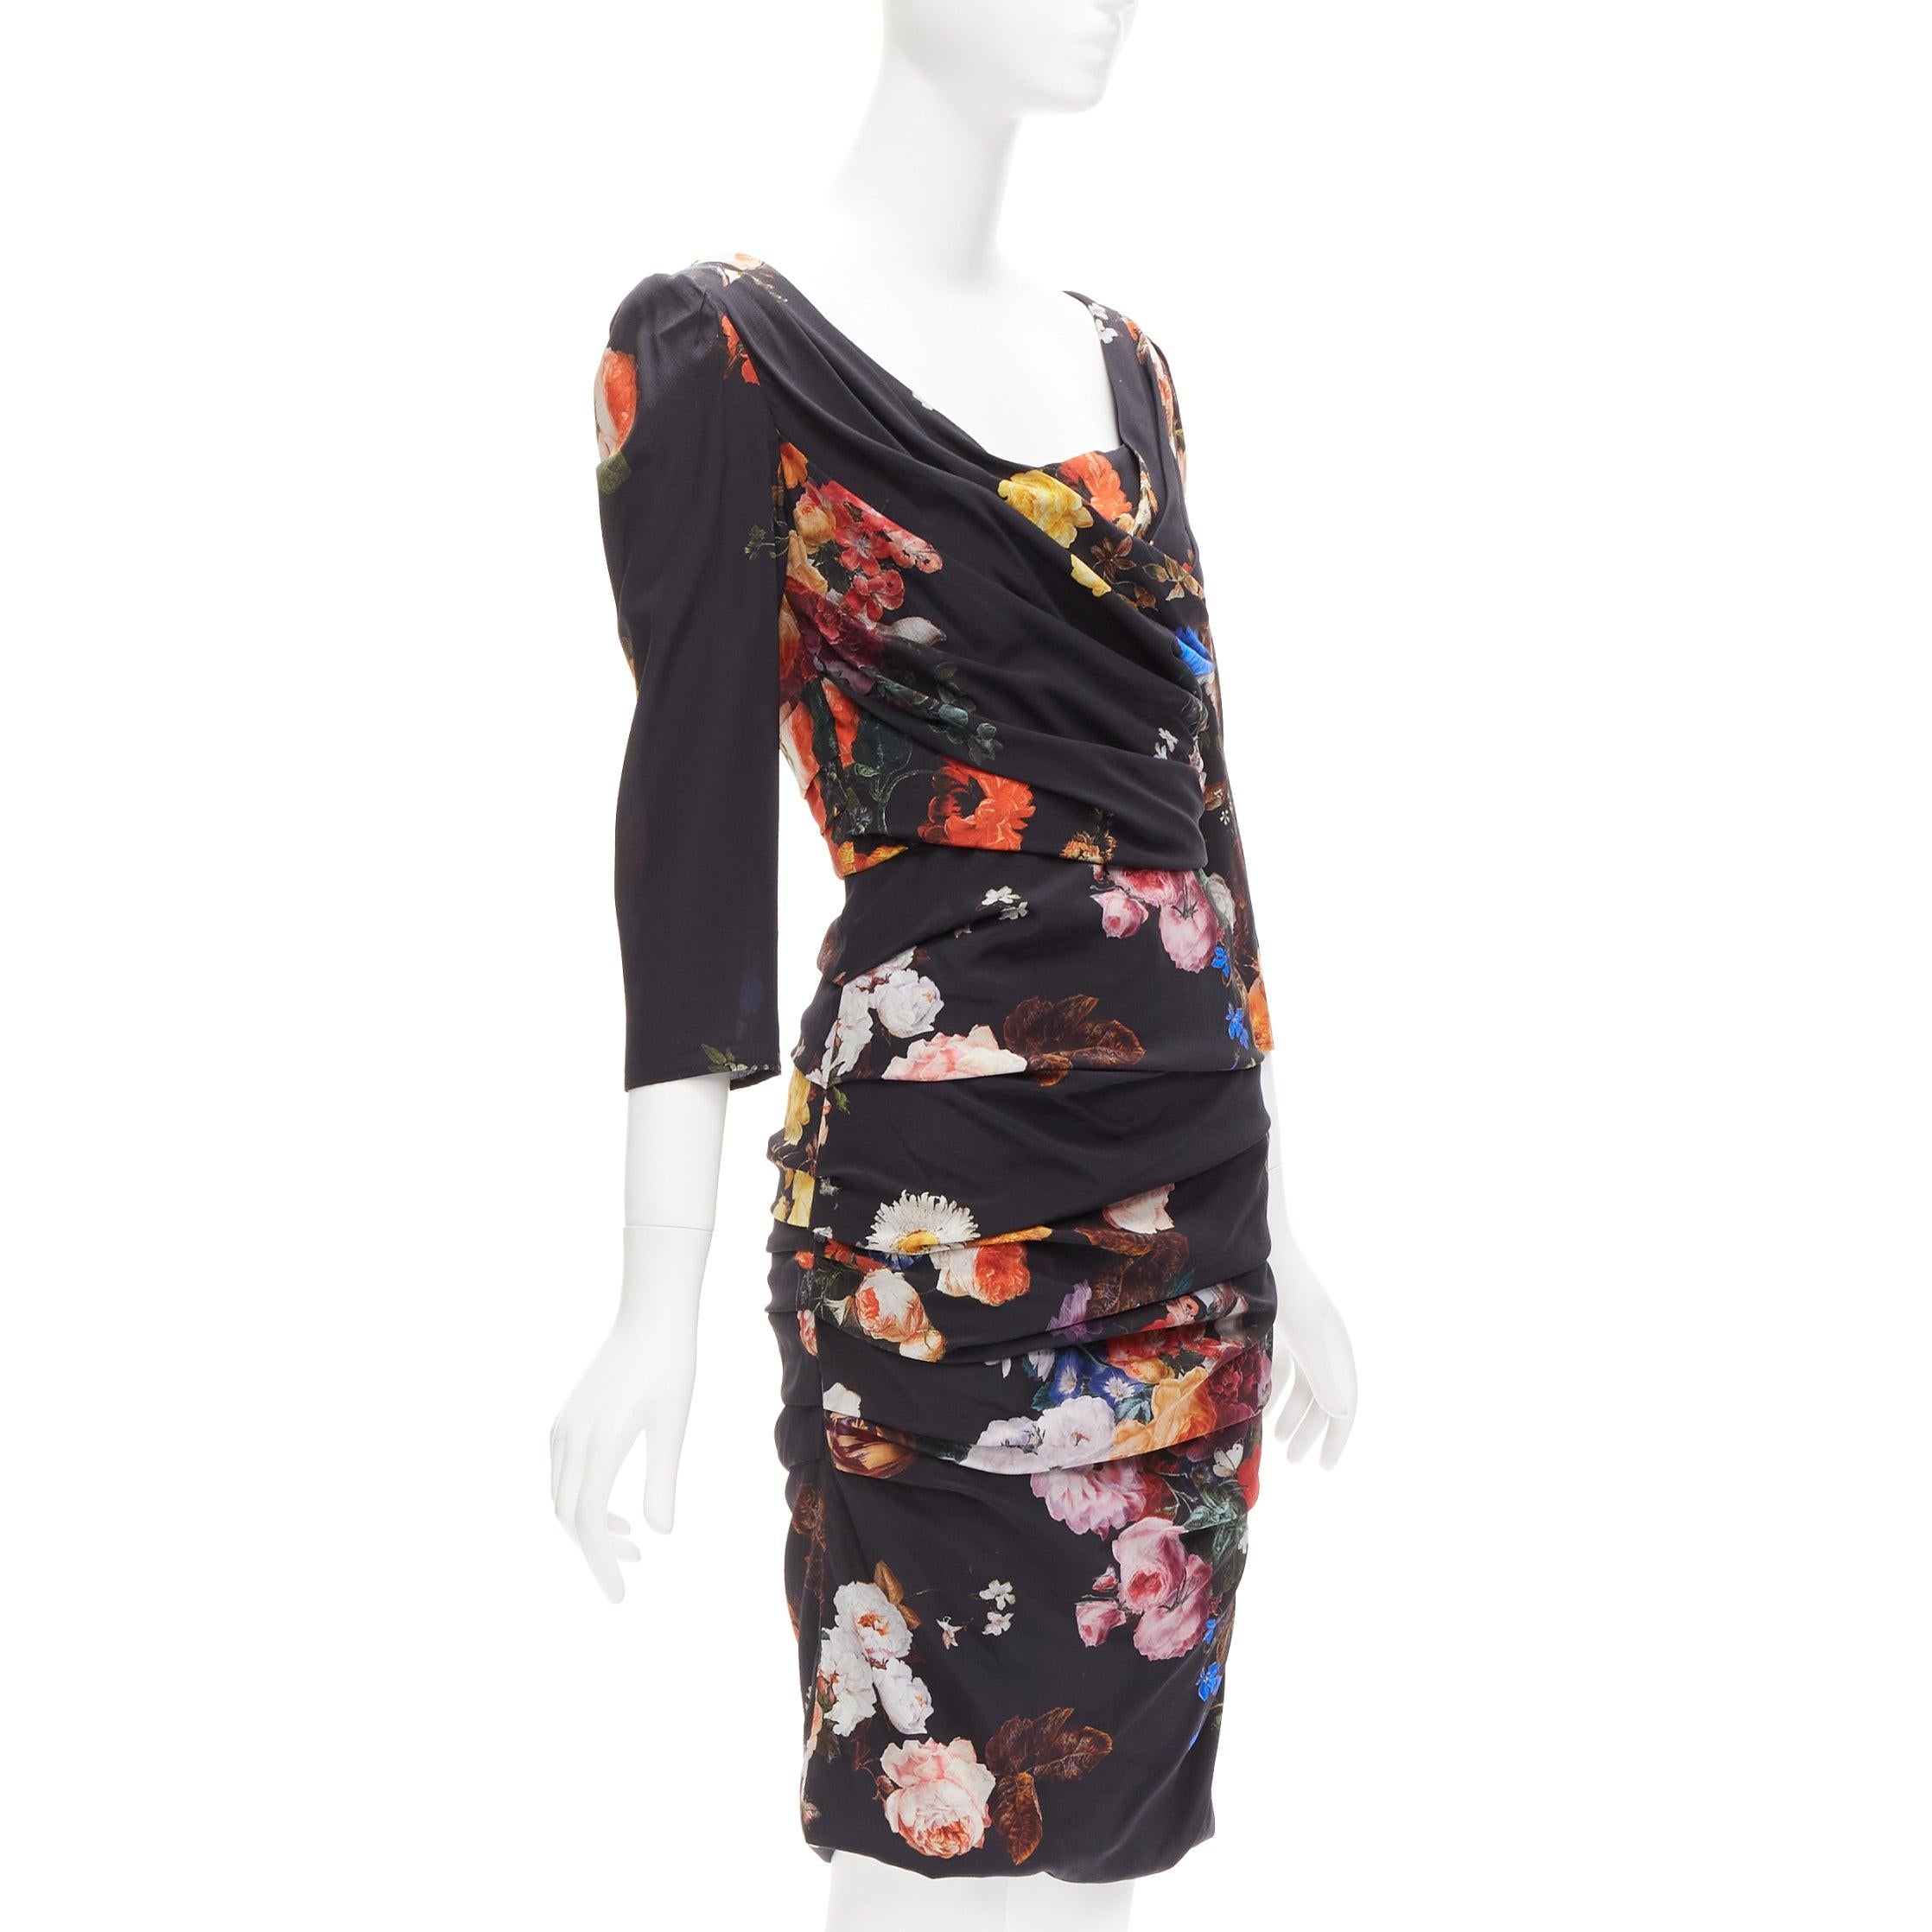 DOLCE GABBANA black multicolour silk blend floral print ruched dress IT42 M
Reference: TGAS/D00953
Brand: Dolce Gabbana
Designer: Domenico Dolce and Stefano Gabbana
Material: Silk, Blend
Color: Black, Multicolour
Pattern: Floral
Closure: Zip
Lining: